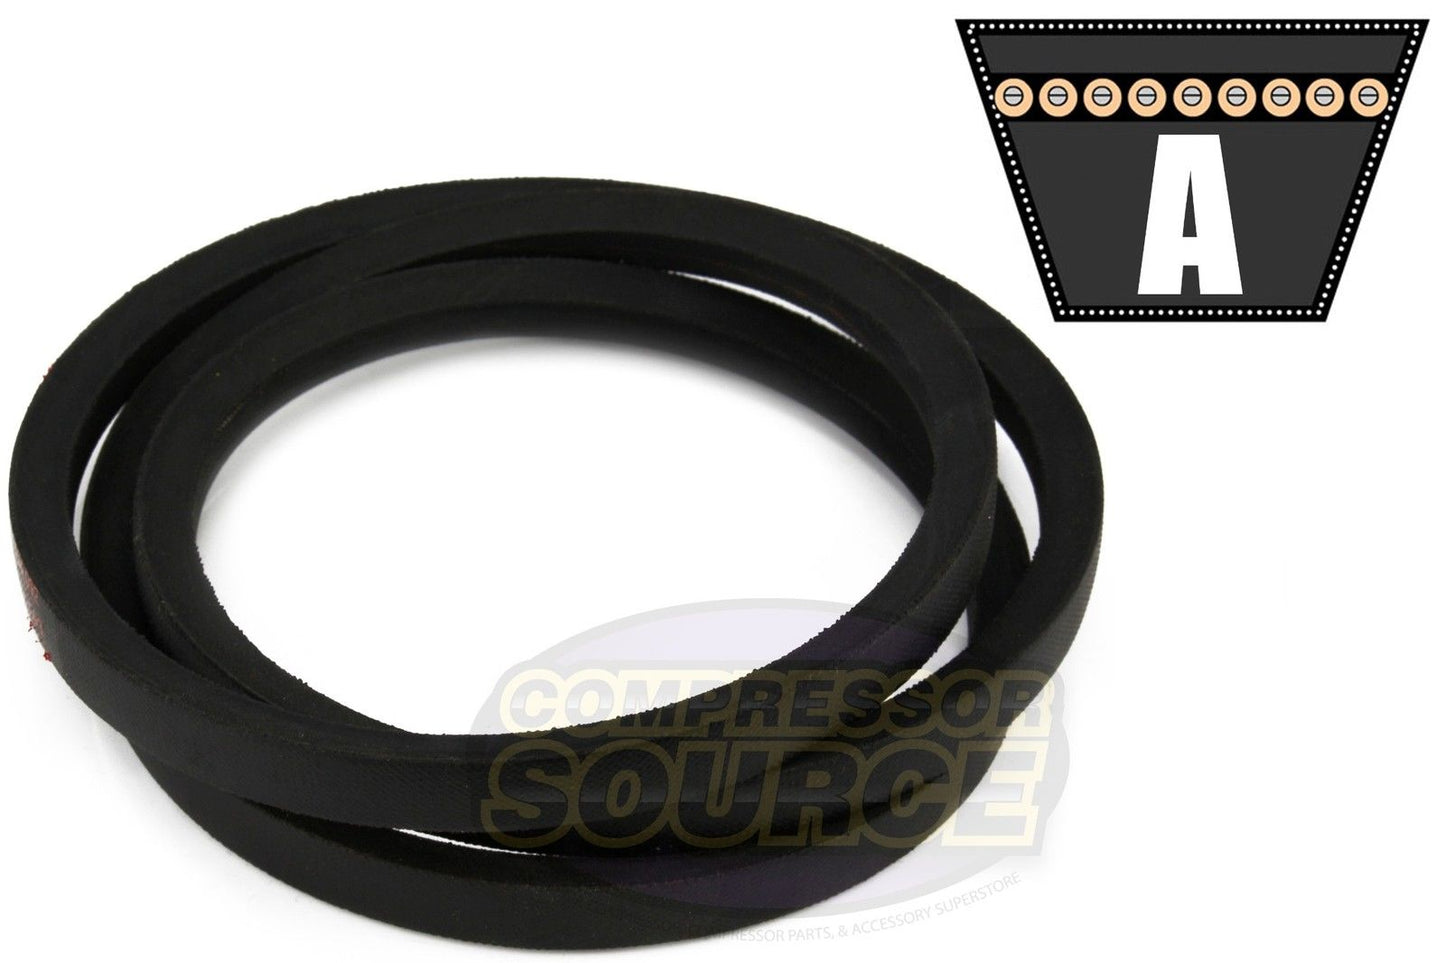 A92 Replacement High Quality Industrial & Lawn Mower 1/2" x 94" V Belt 4L940